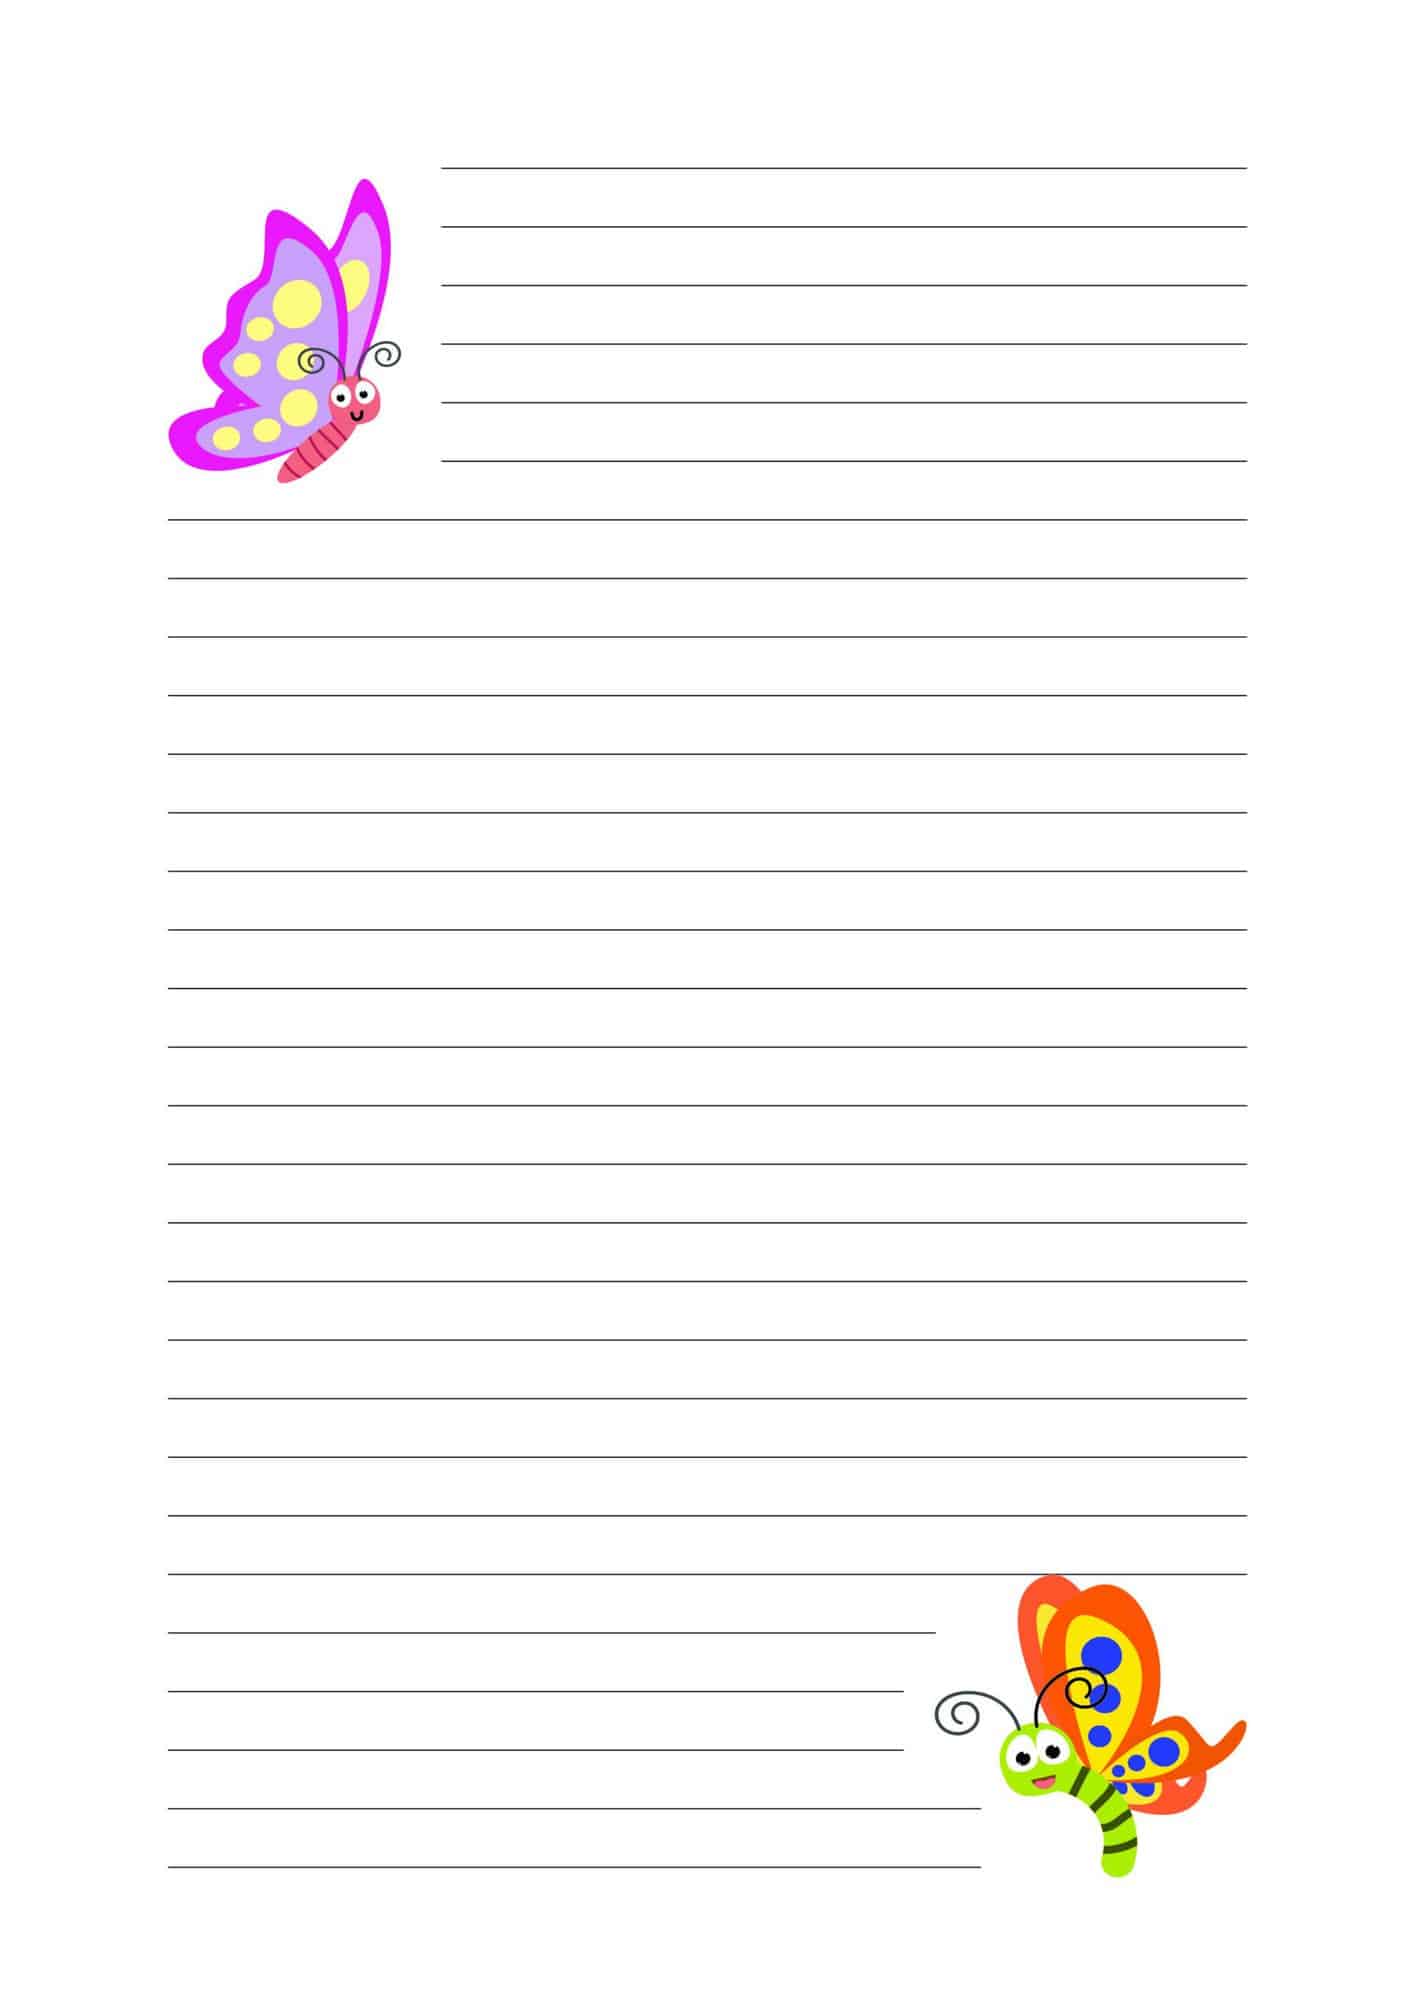 Cute lined paper printable with butterflies.